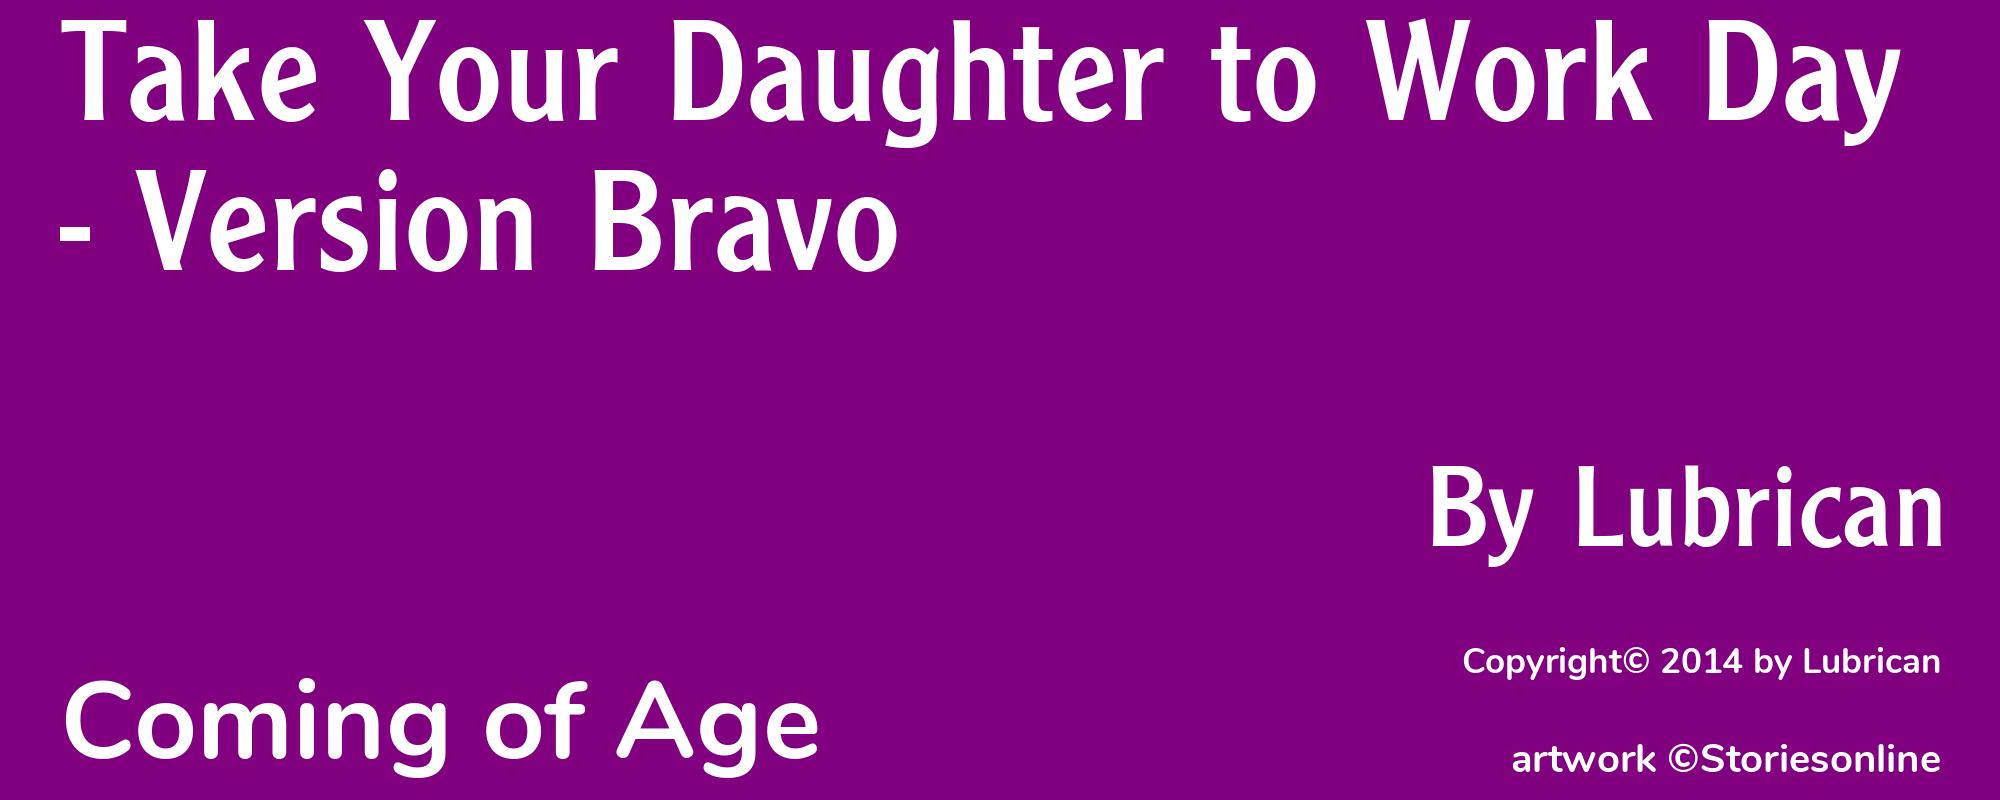 Take Your Daughter to Work Day - Version Bravo - Cover